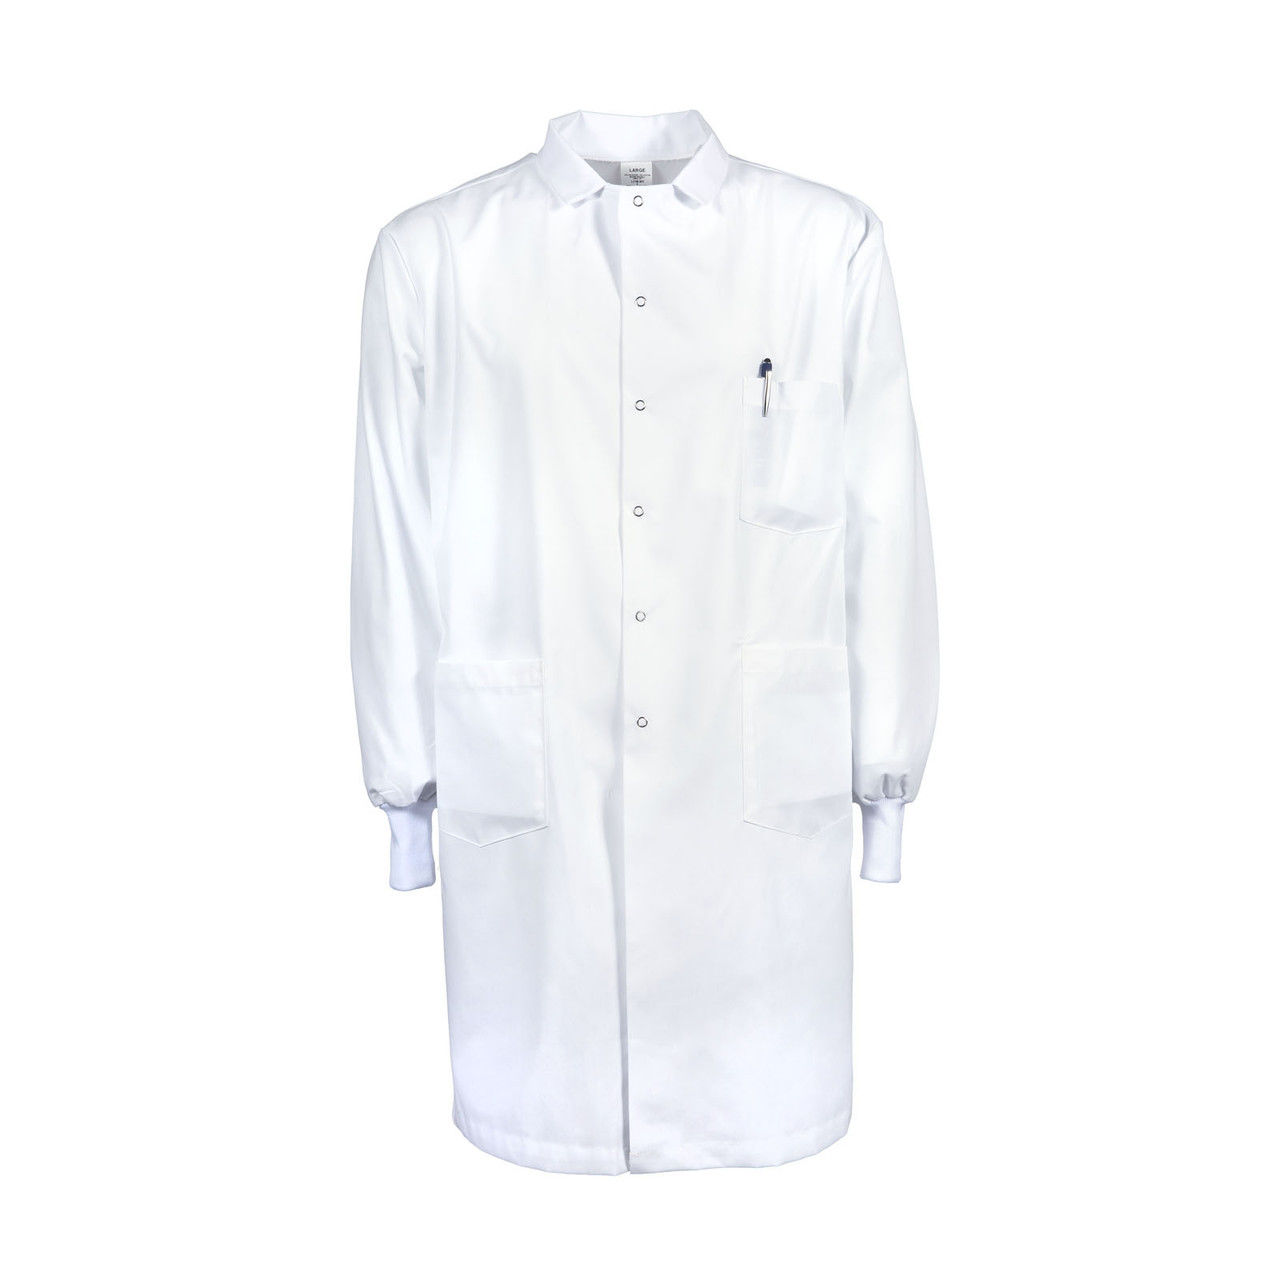 Where will my snap button lab coat with knit cuffs be shipped from?